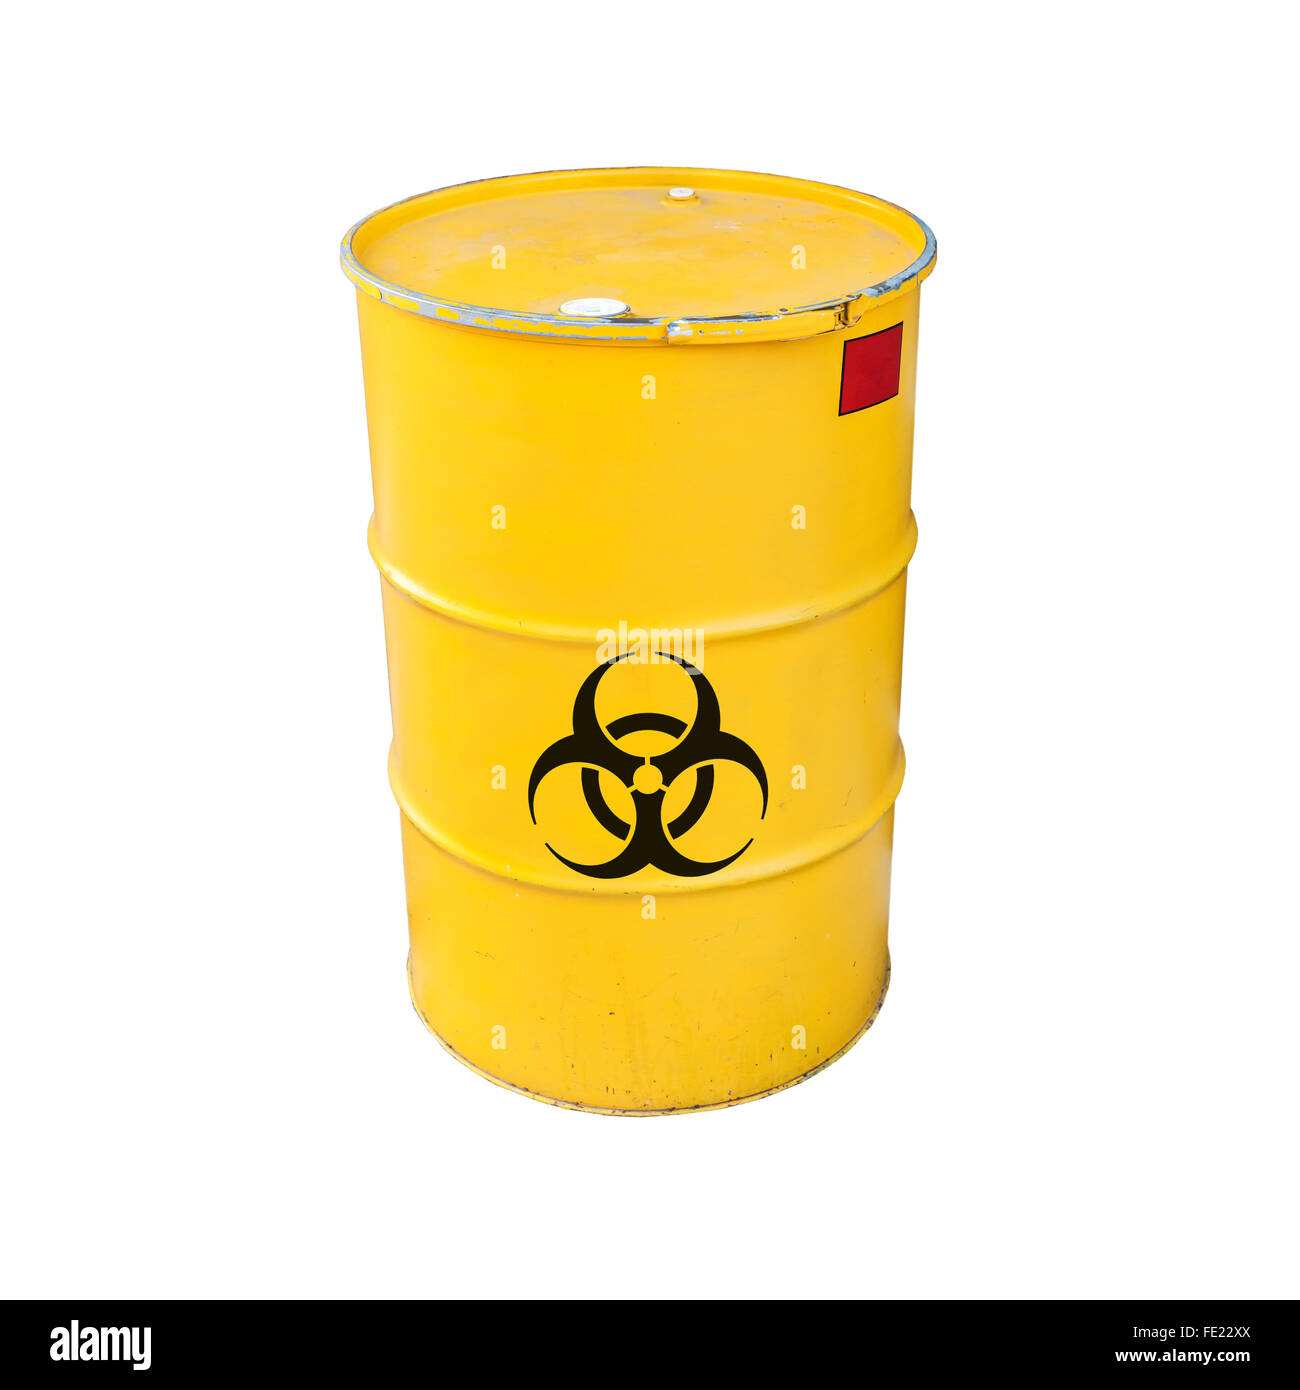 Yellow metal barrel with black biohazard warning sign isolated on white background Stock Photo